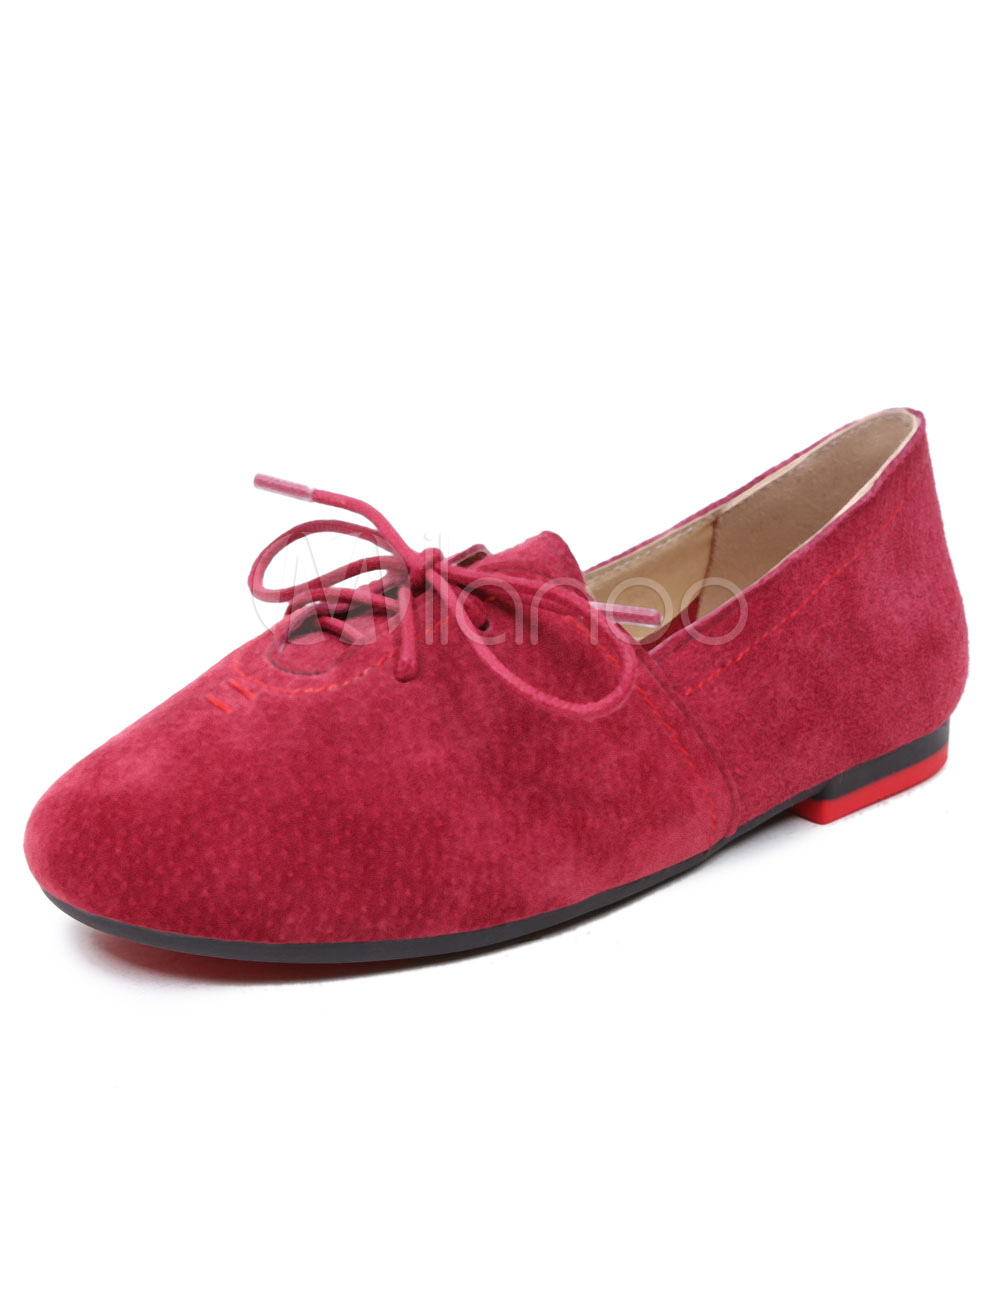 women's shoes red flats